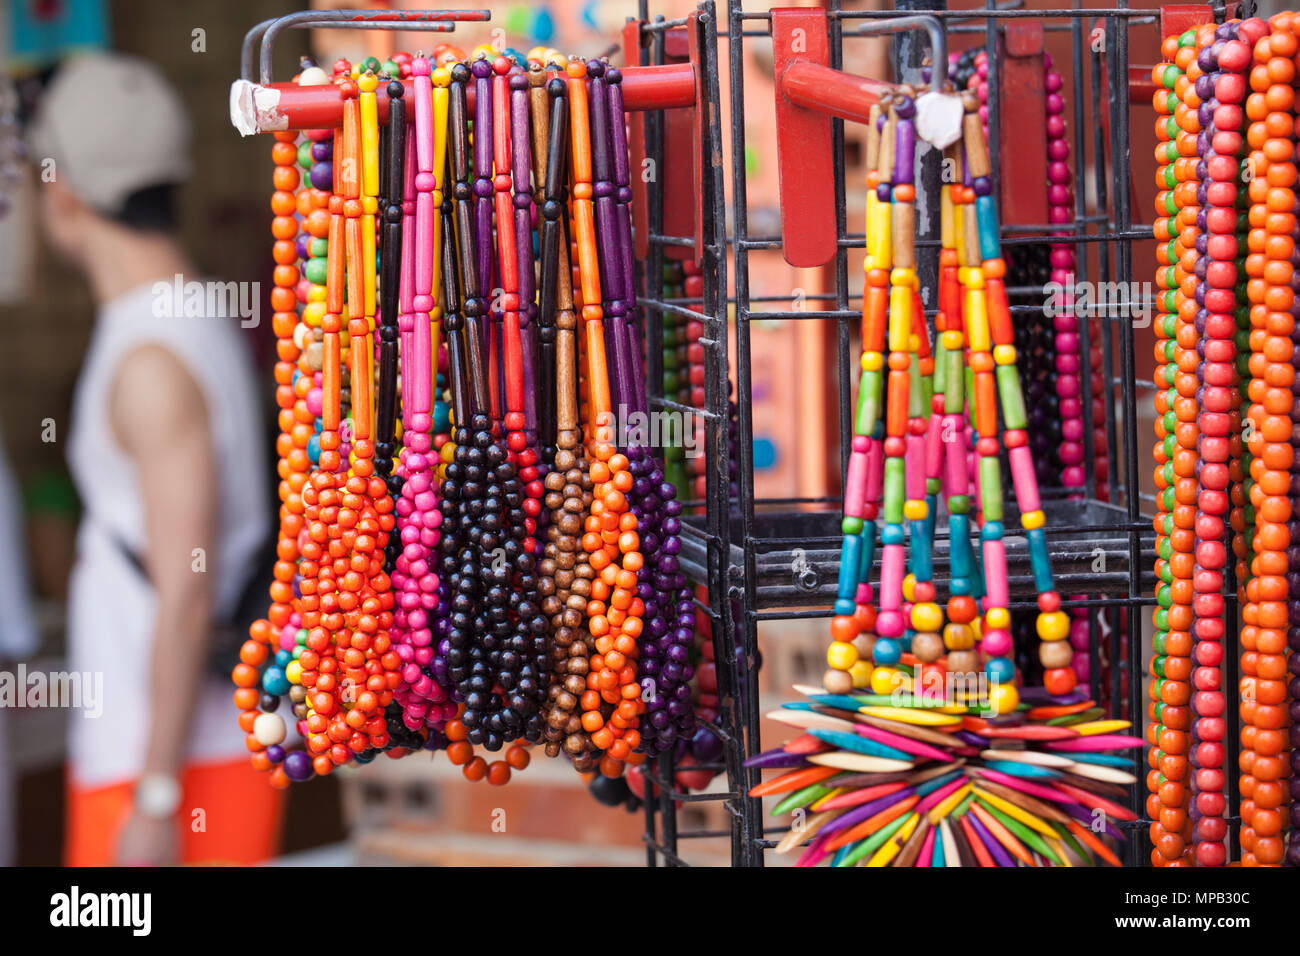 Local jewelry for sale in Cuba Stock Photo - Alamy